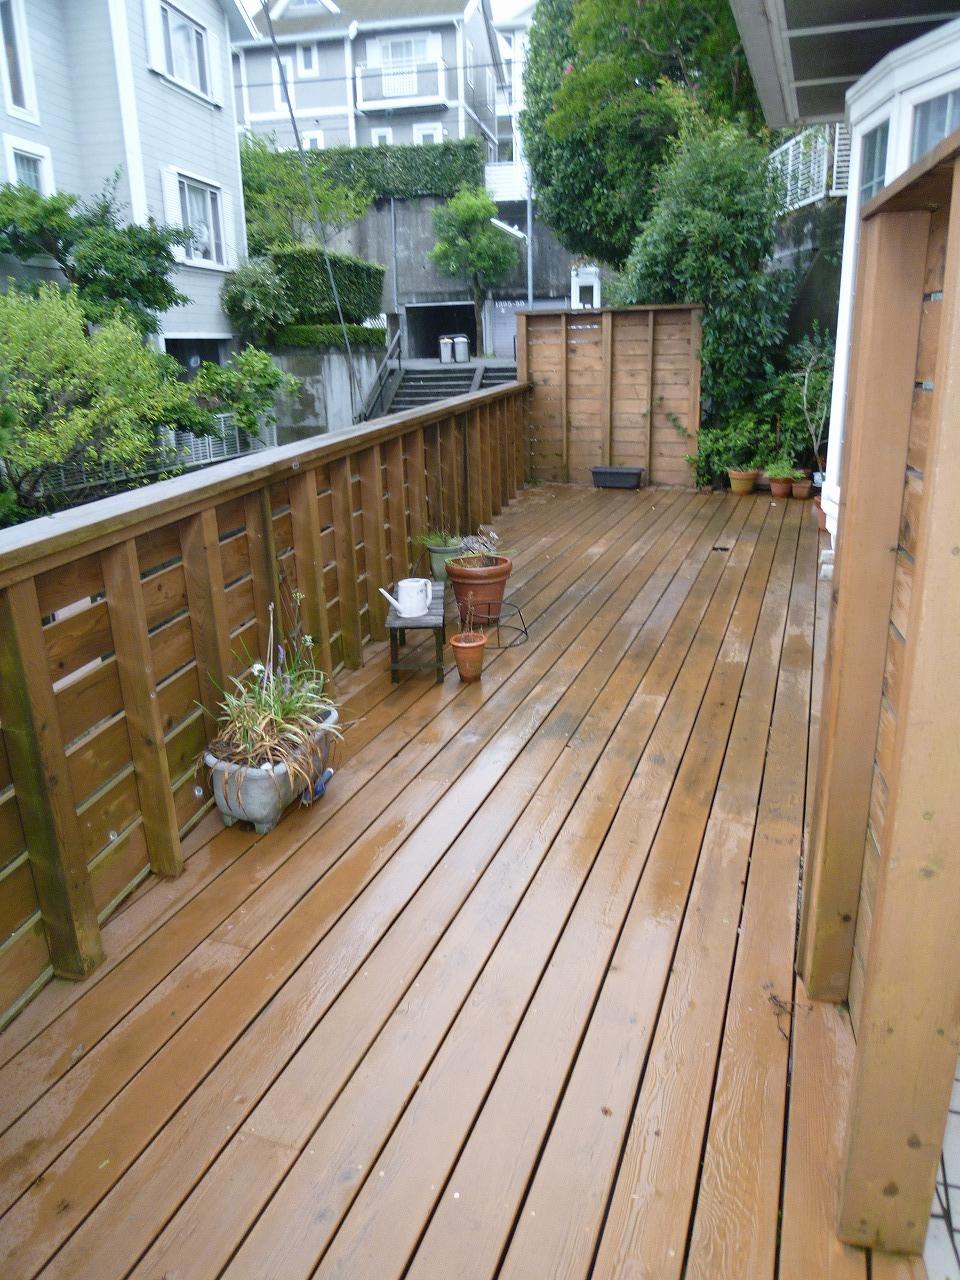 Other local. Wood deck